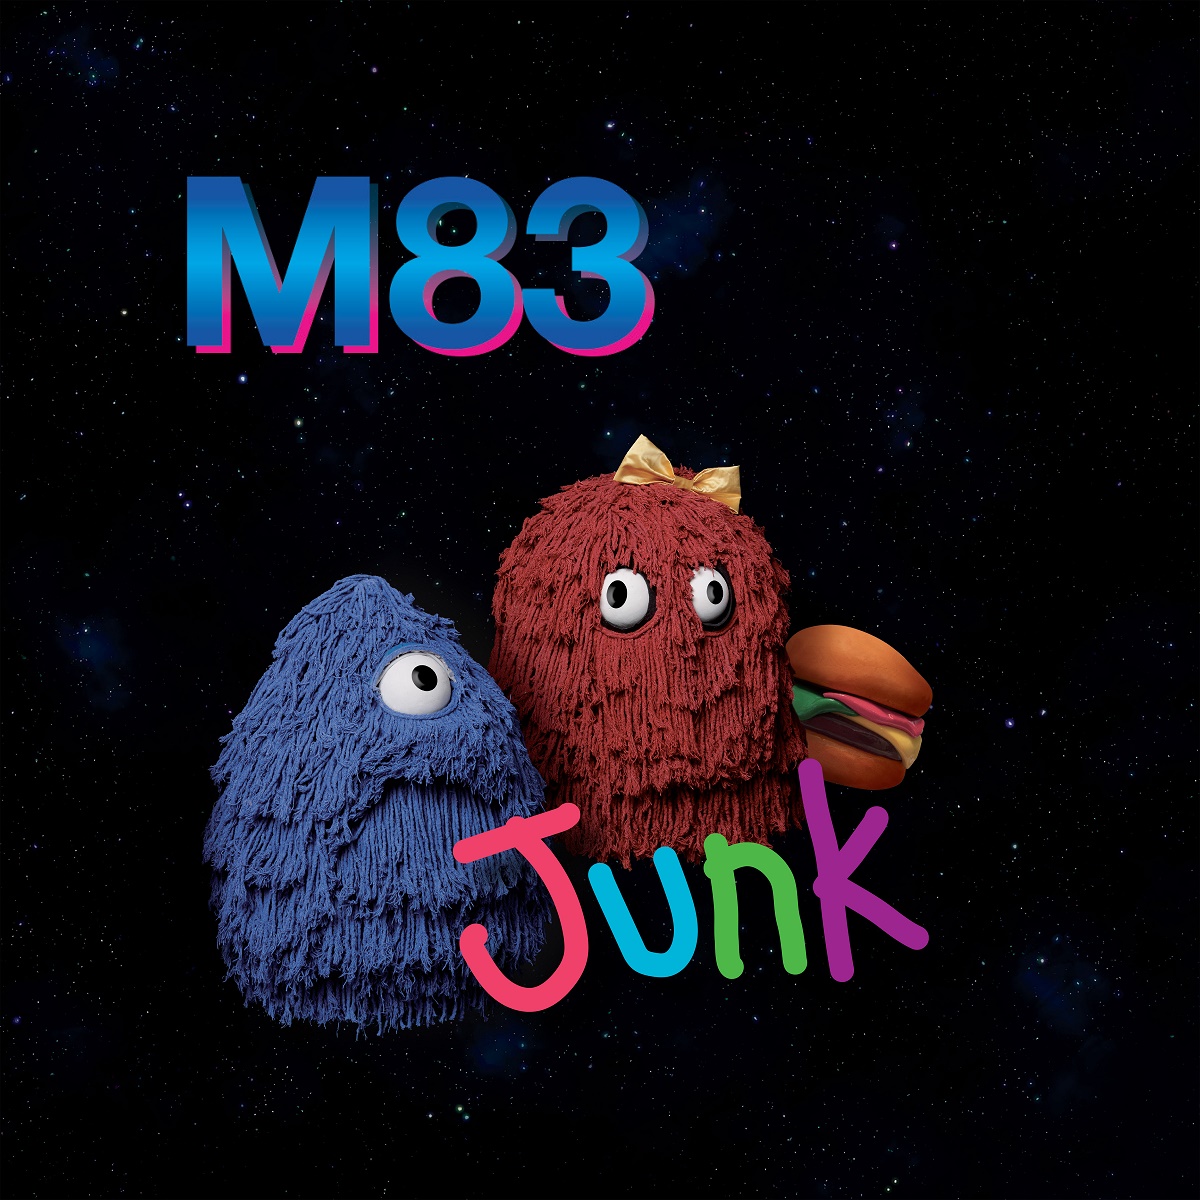 'Junk' by M83 review by Alice Severin. The forthcoming full-length comes out on April 8th via Mute Records.